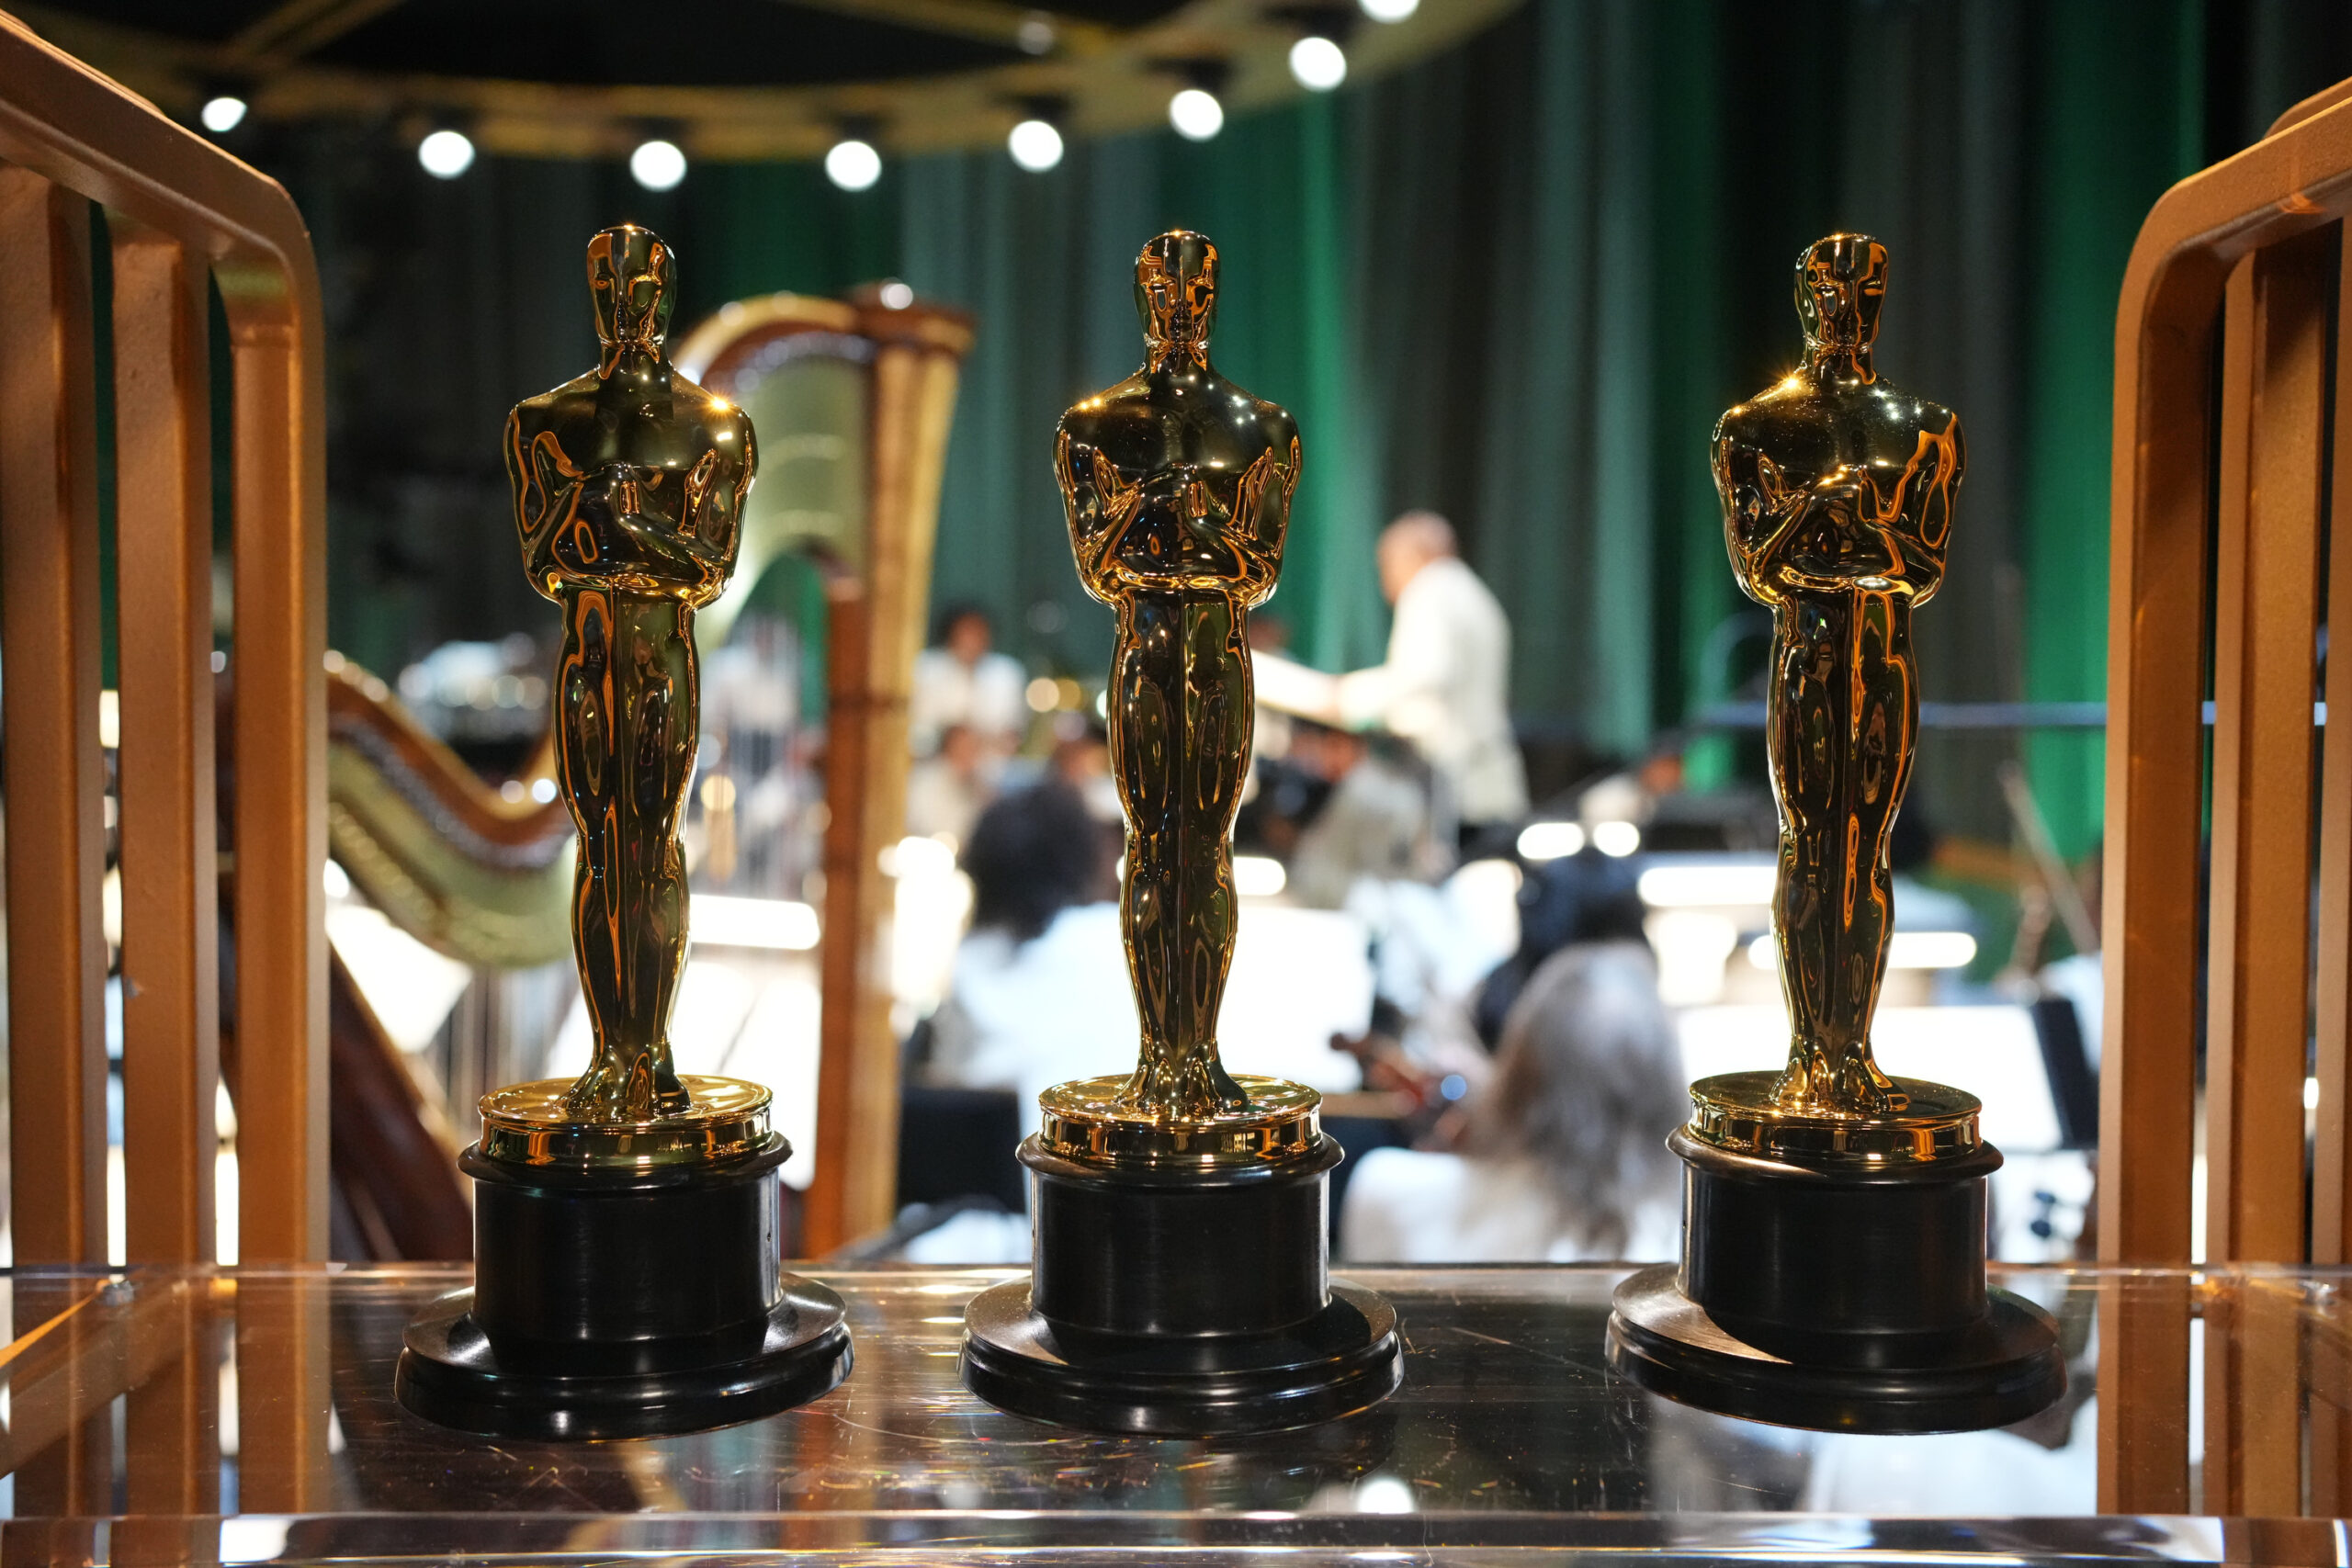 Oscars statues ready to be given out.